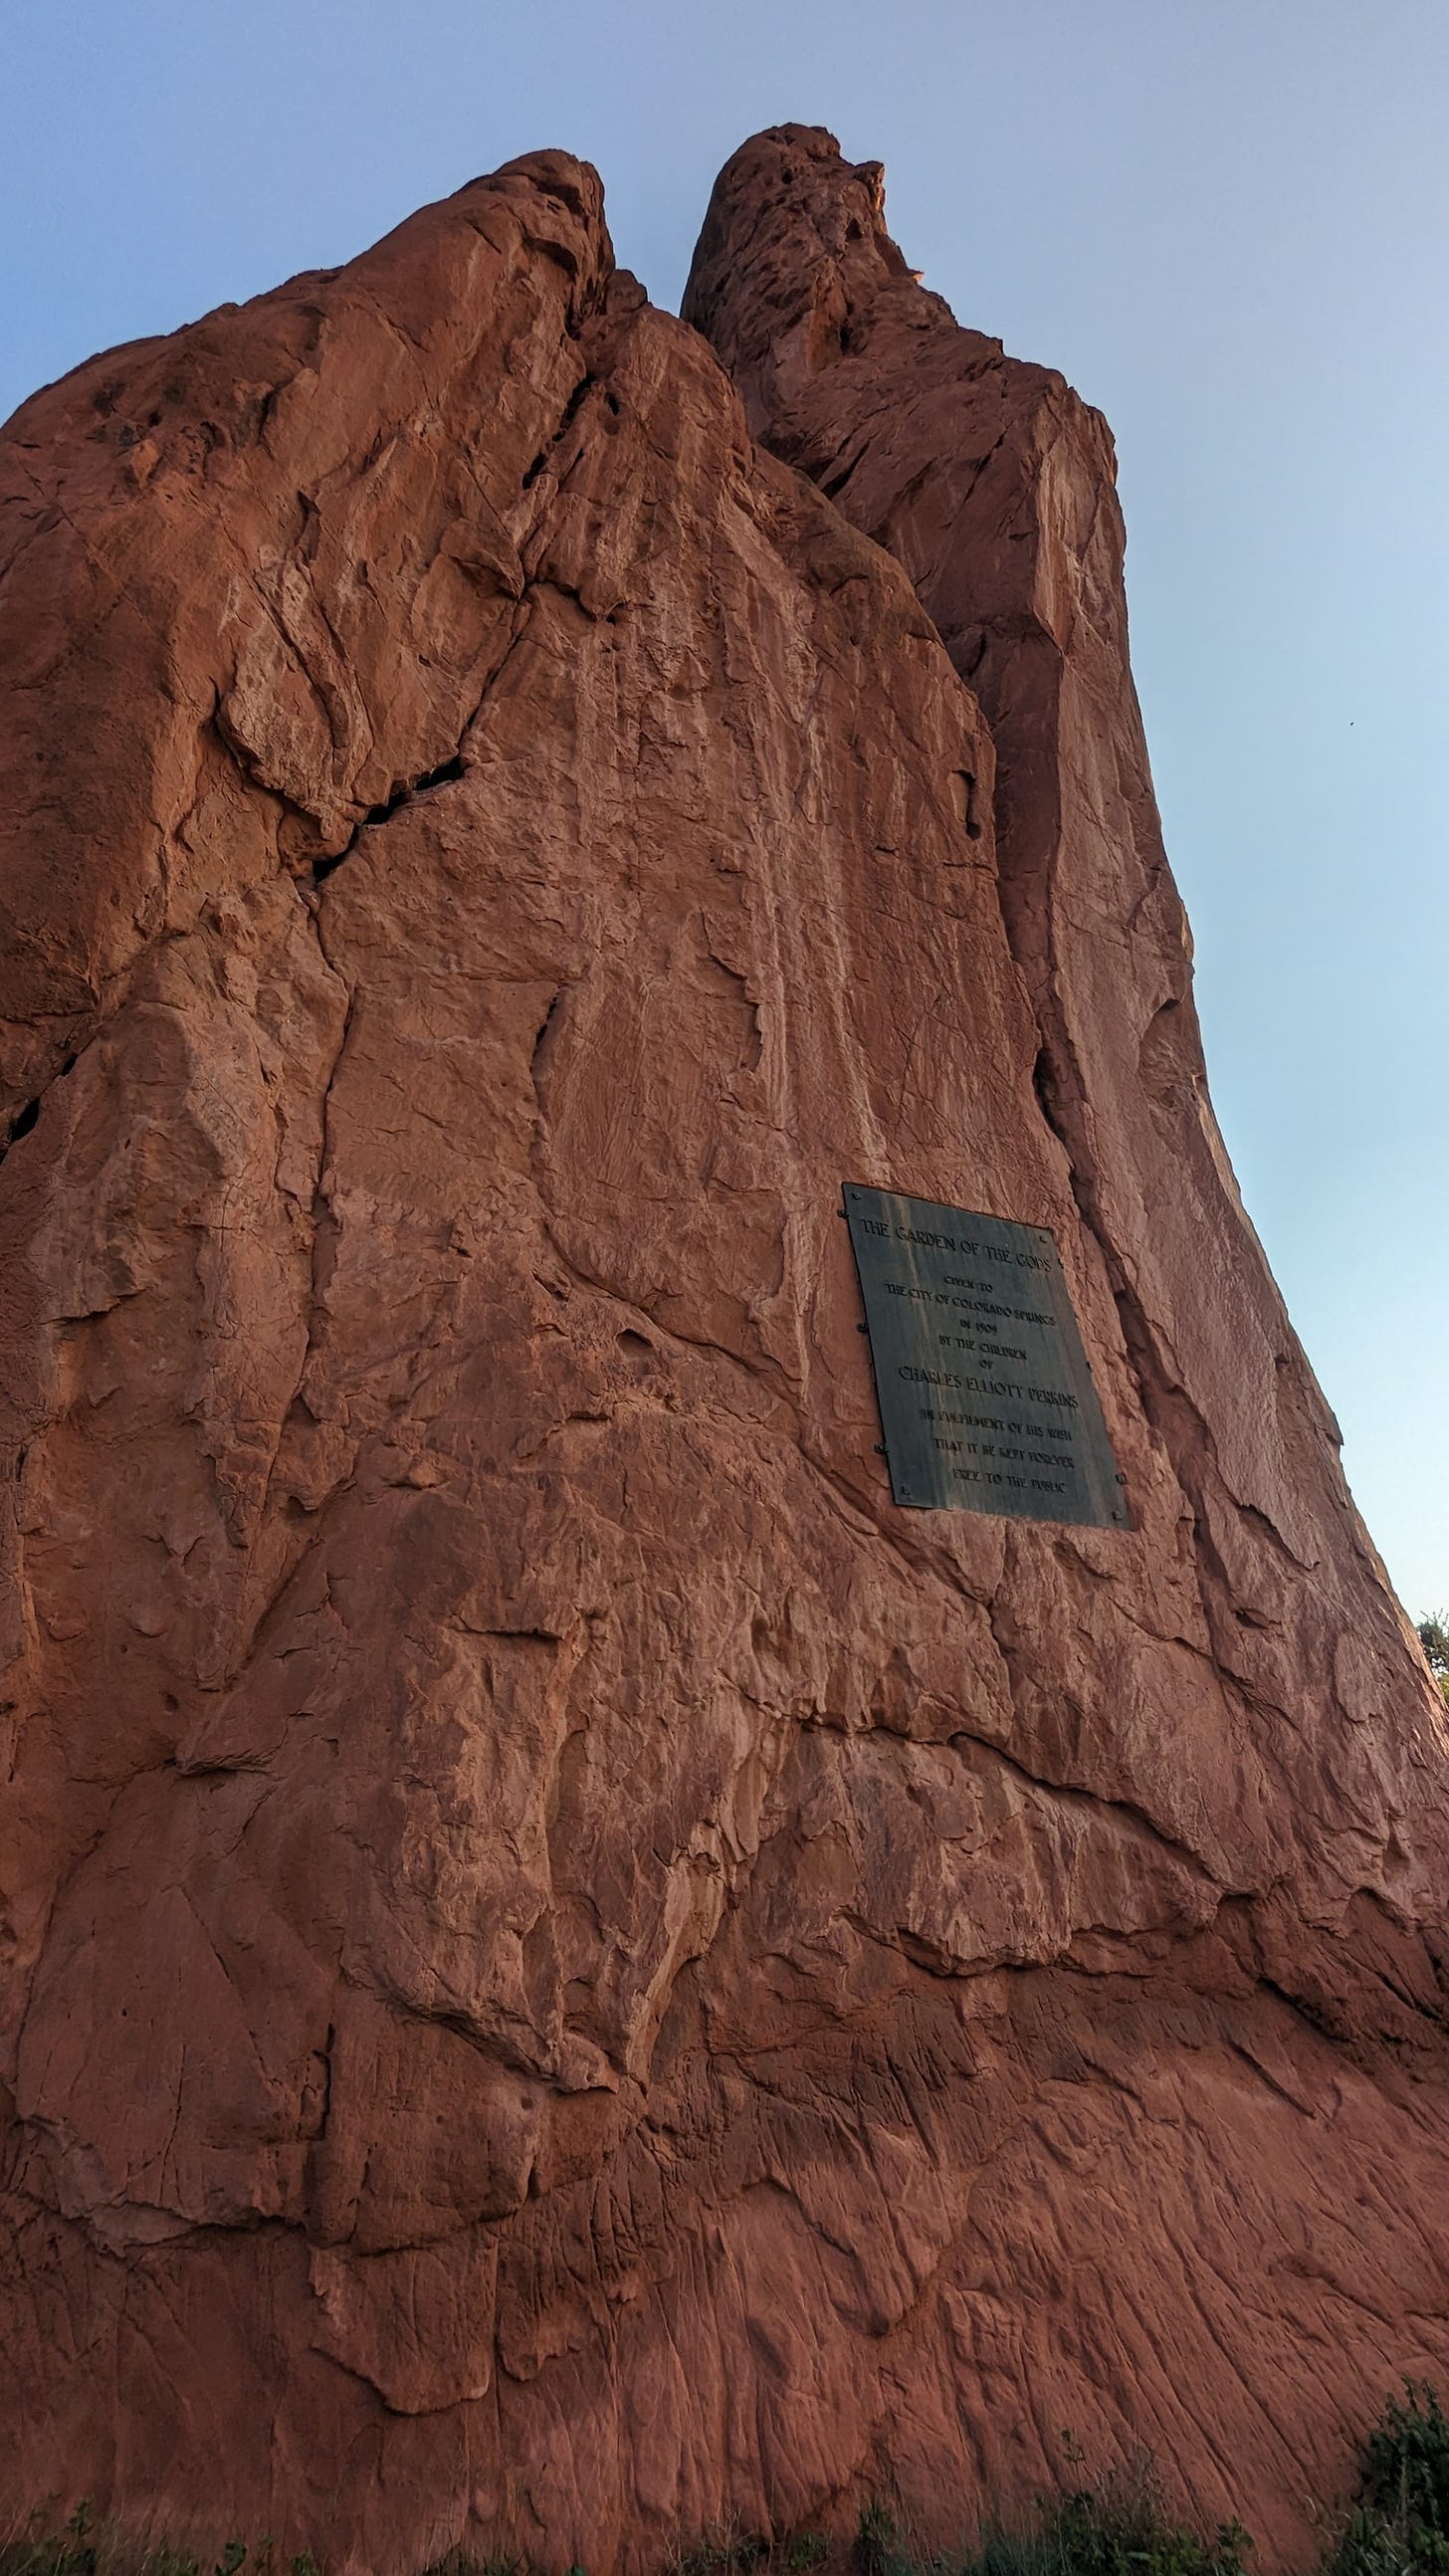 The massive inscription at the entry to the Garden of the Gods - Things I Wrote Down by Andrew Kooman